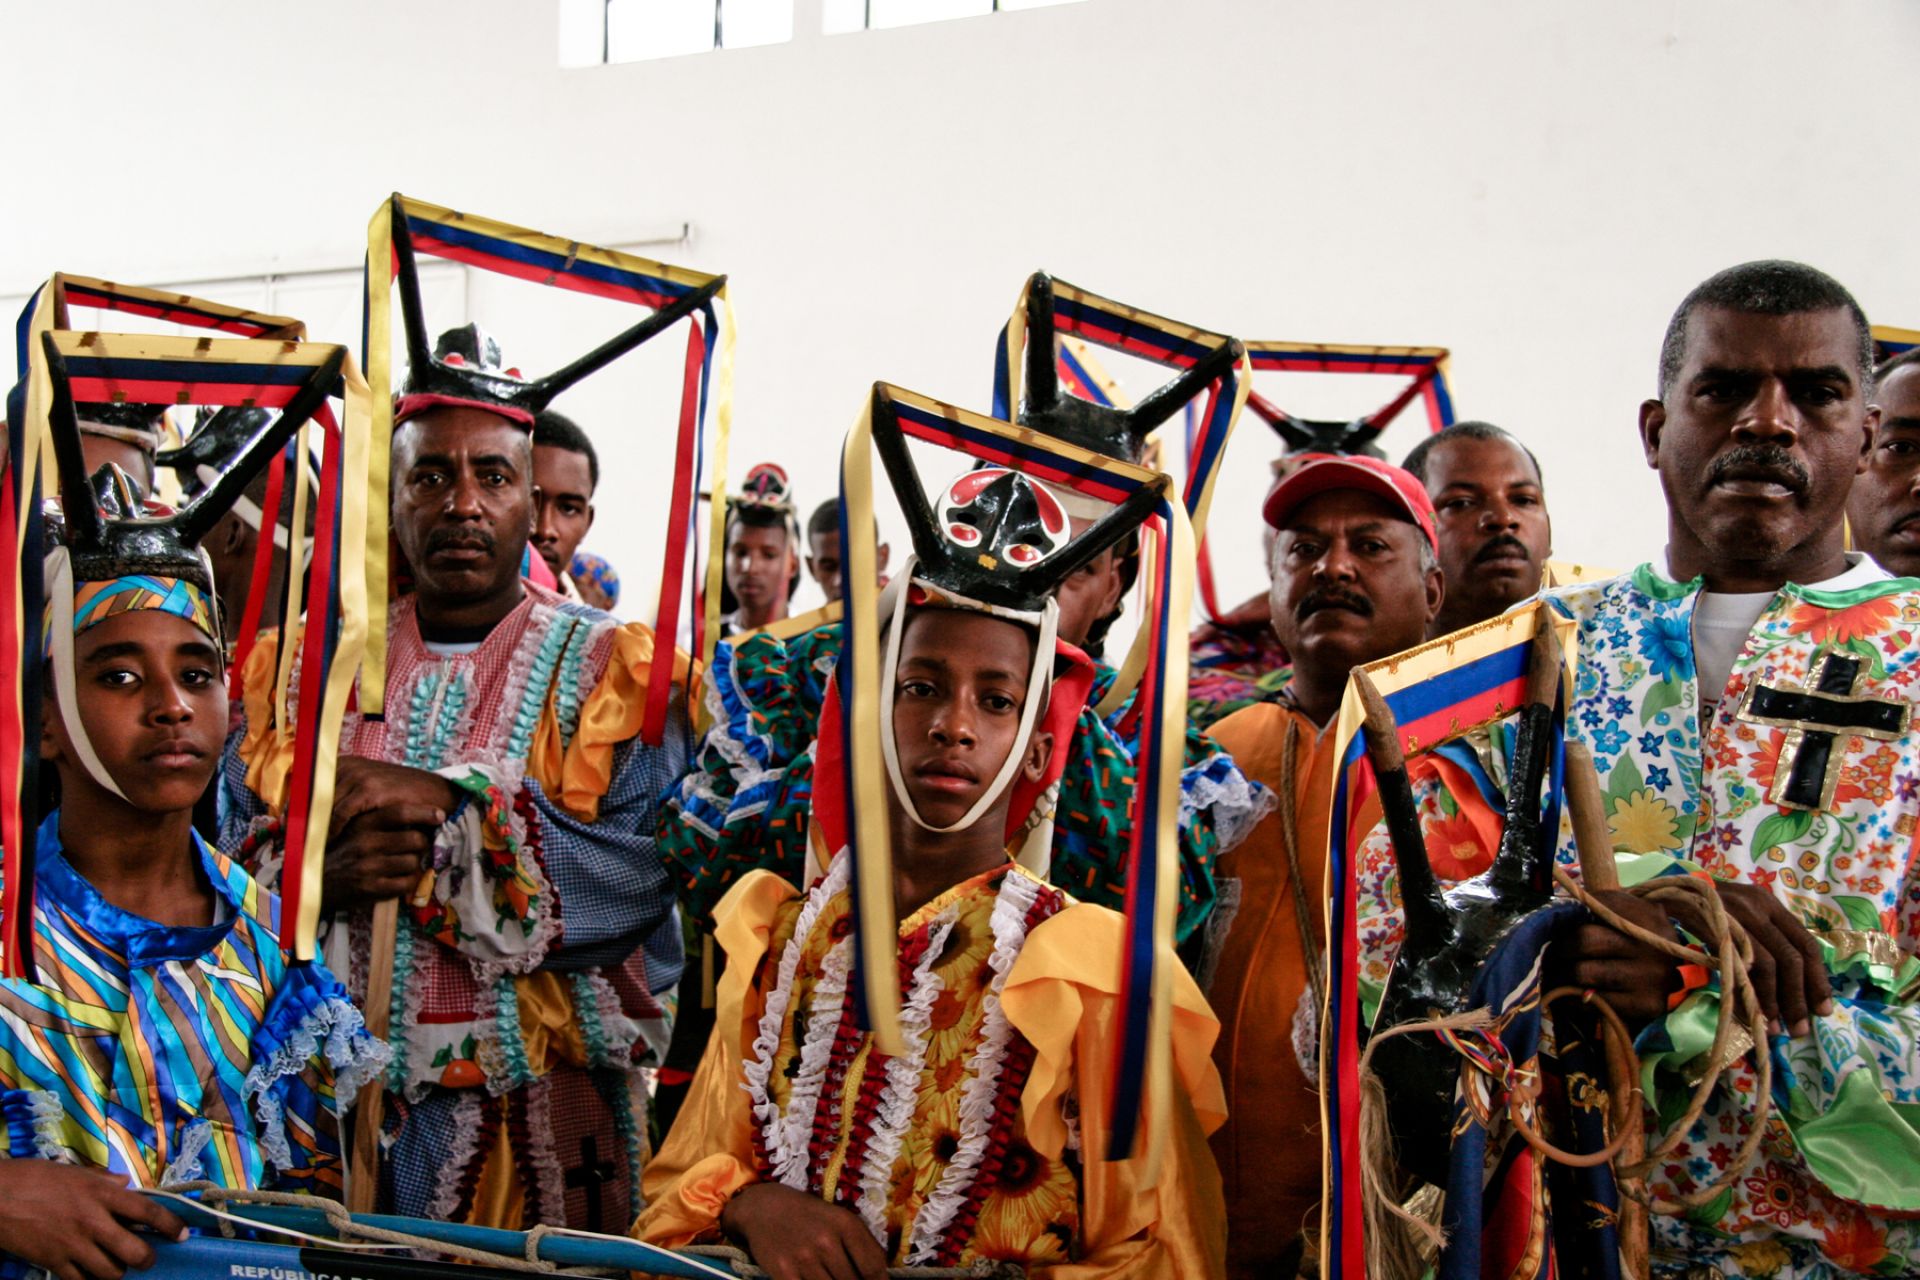 Group of Diablos Danzantes de Chuao, tradition bearers who pass knowledge orally from one generation to the next